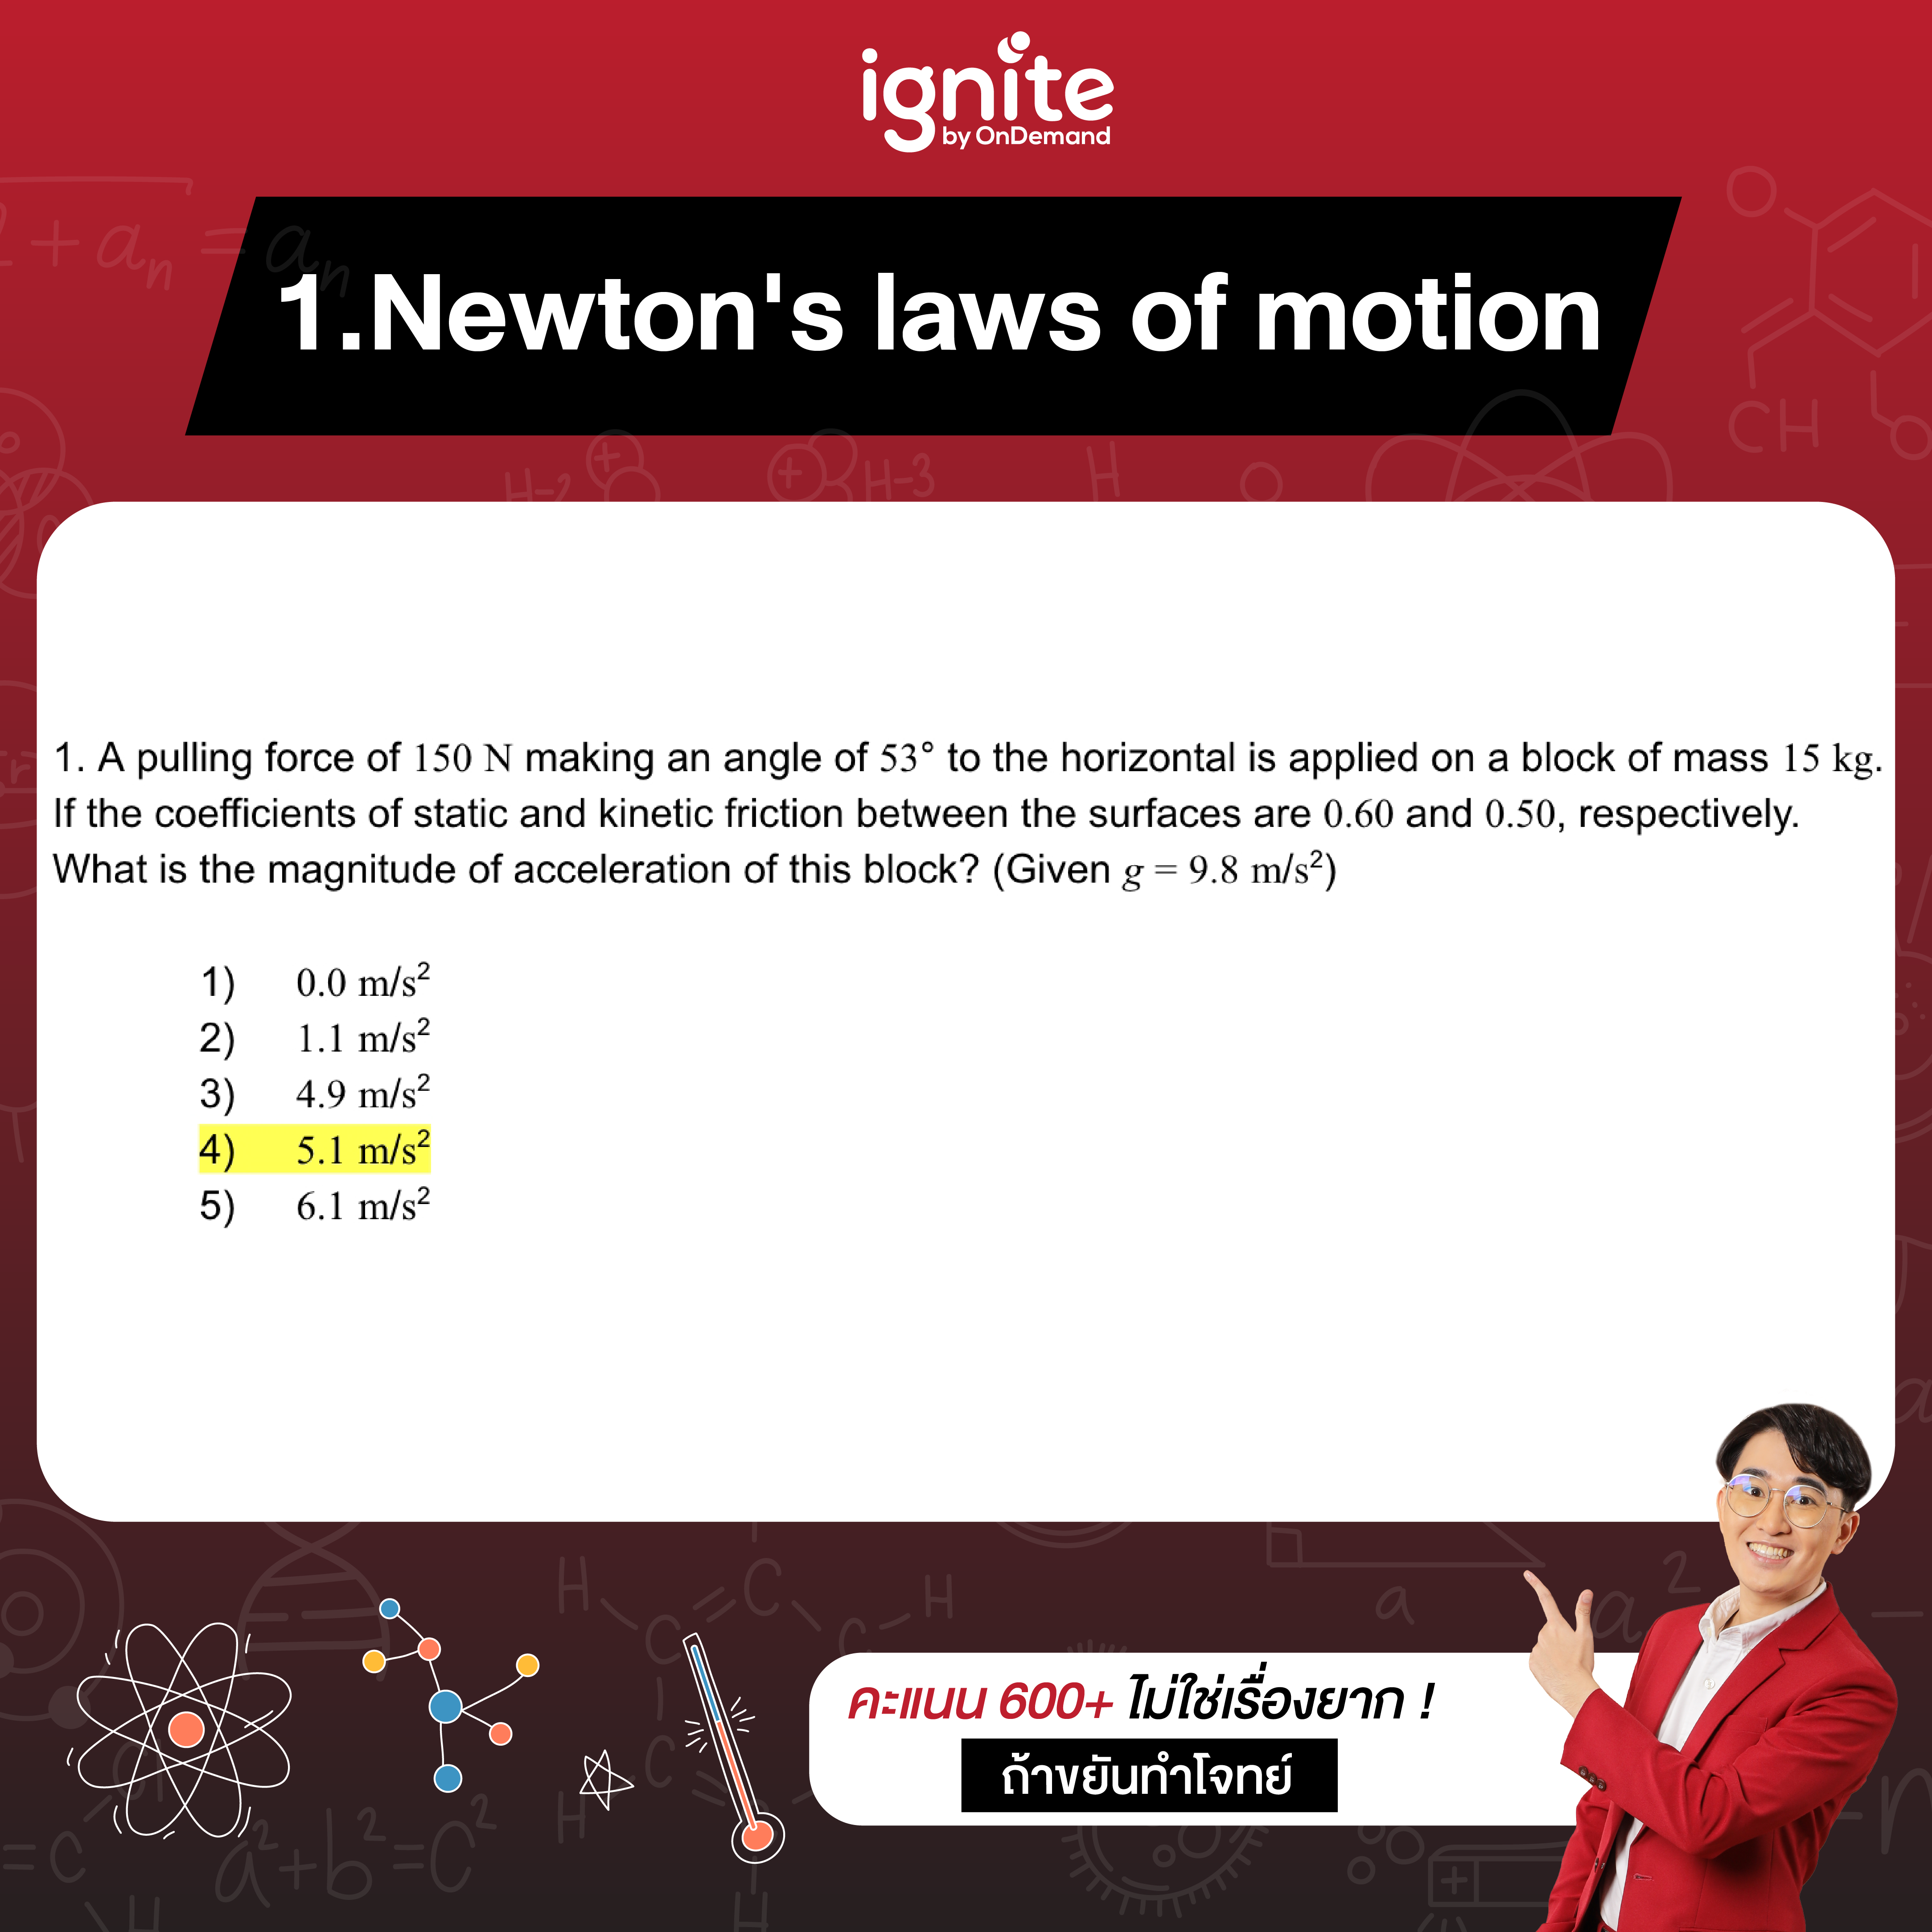 Newton s laws of motion CU-ATS - Physics - Jan 2023 - ignite by OnDemand